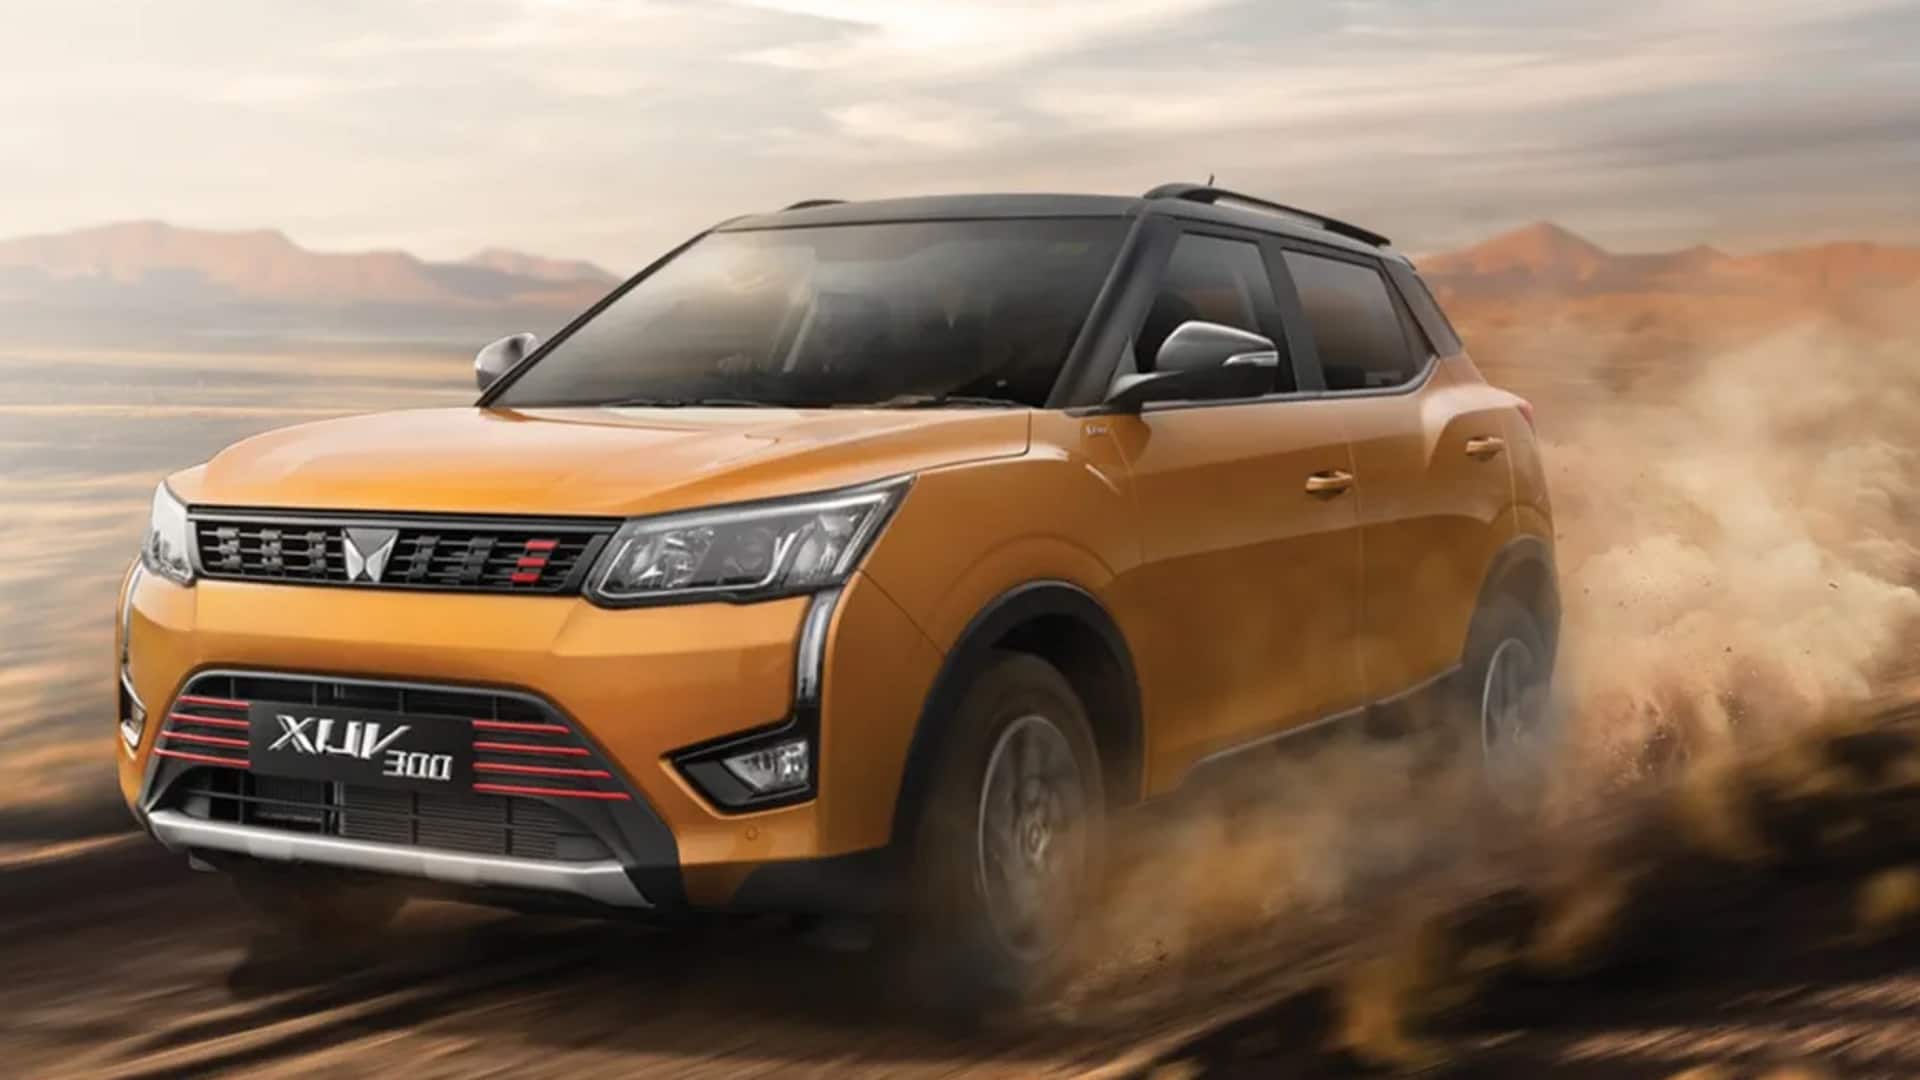 Mahindra XUV300 (facelift) will be offered with new automatic gearbox